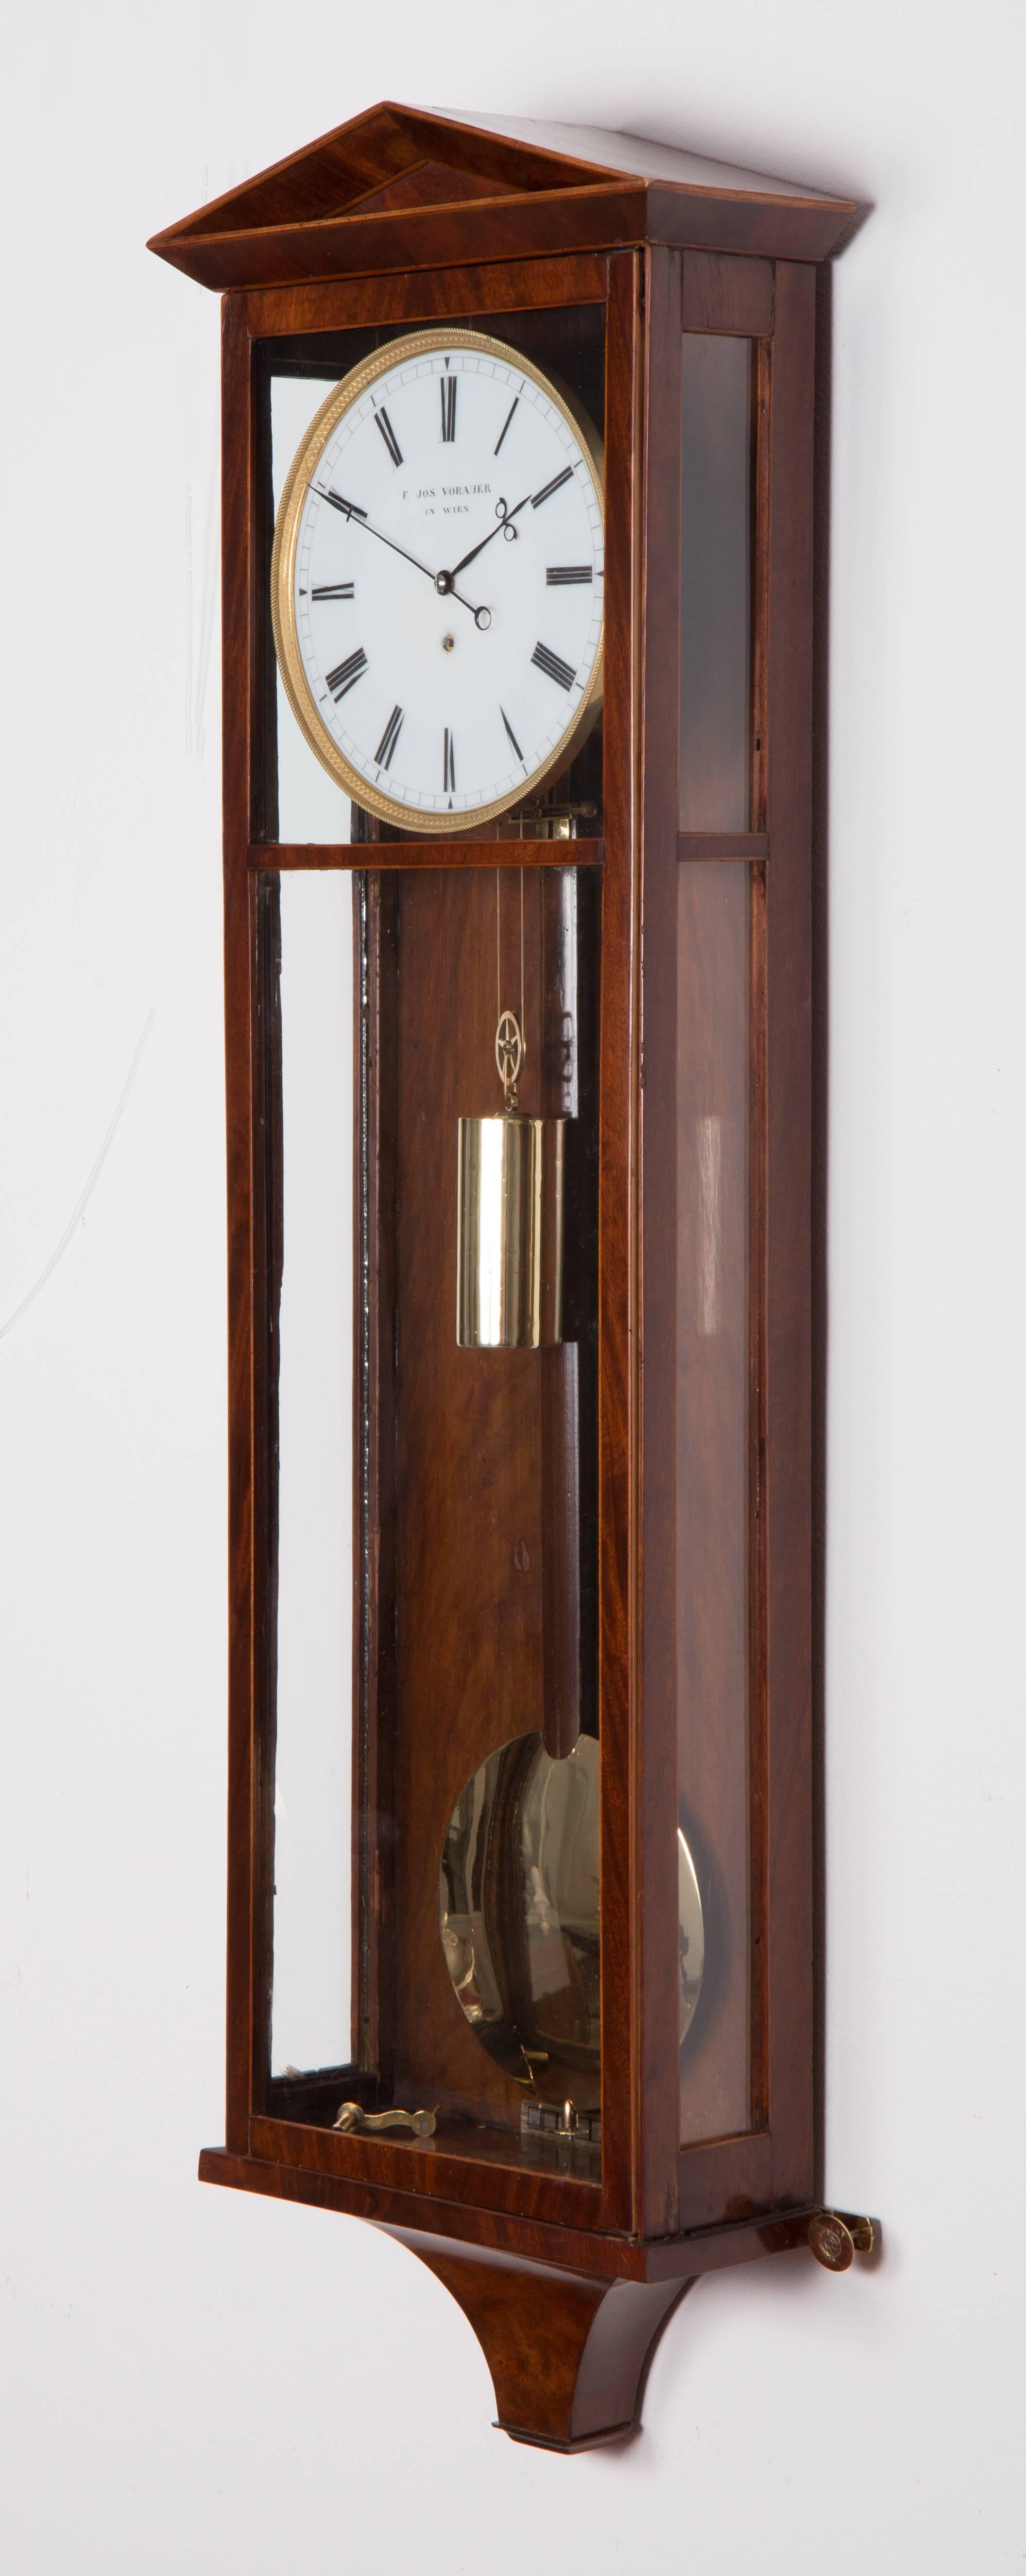 Measures: Length: 89 cm, duration: eight days
Mahogany veneered case with maple stringing, milk glass dial, blued steel hands, gilt and engine turned bezel, deadbeat escapement, spring suspension, wood rod pendulum. Stamp at the back plate: “F.